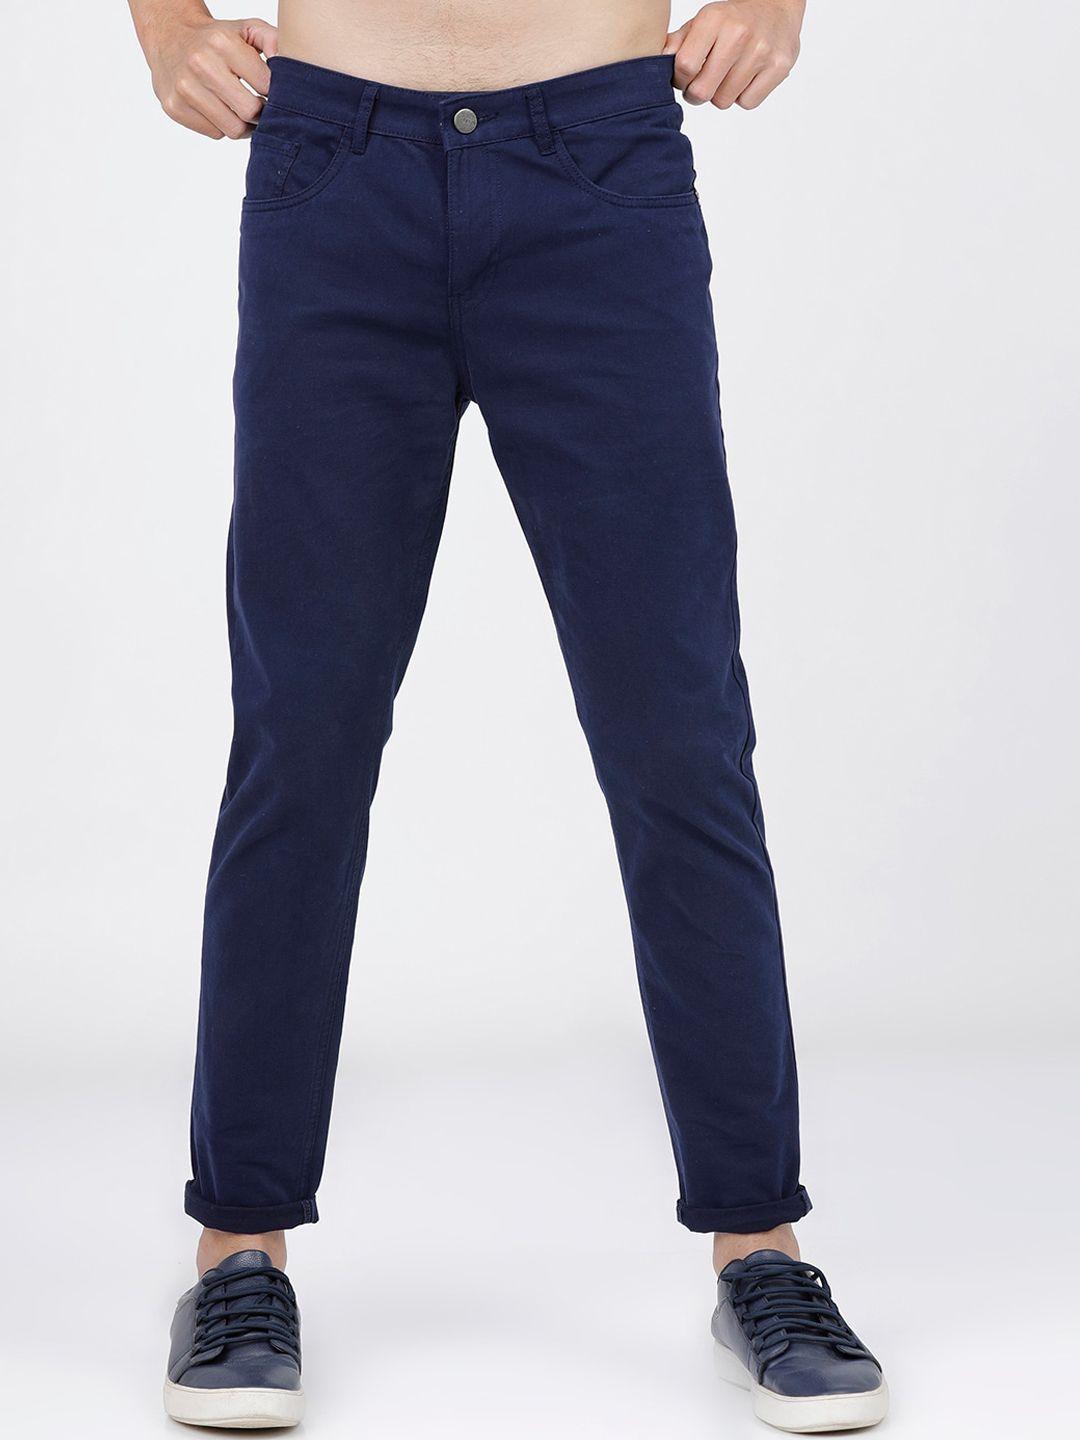 ketch men navy blue tapered fit chinos trousers